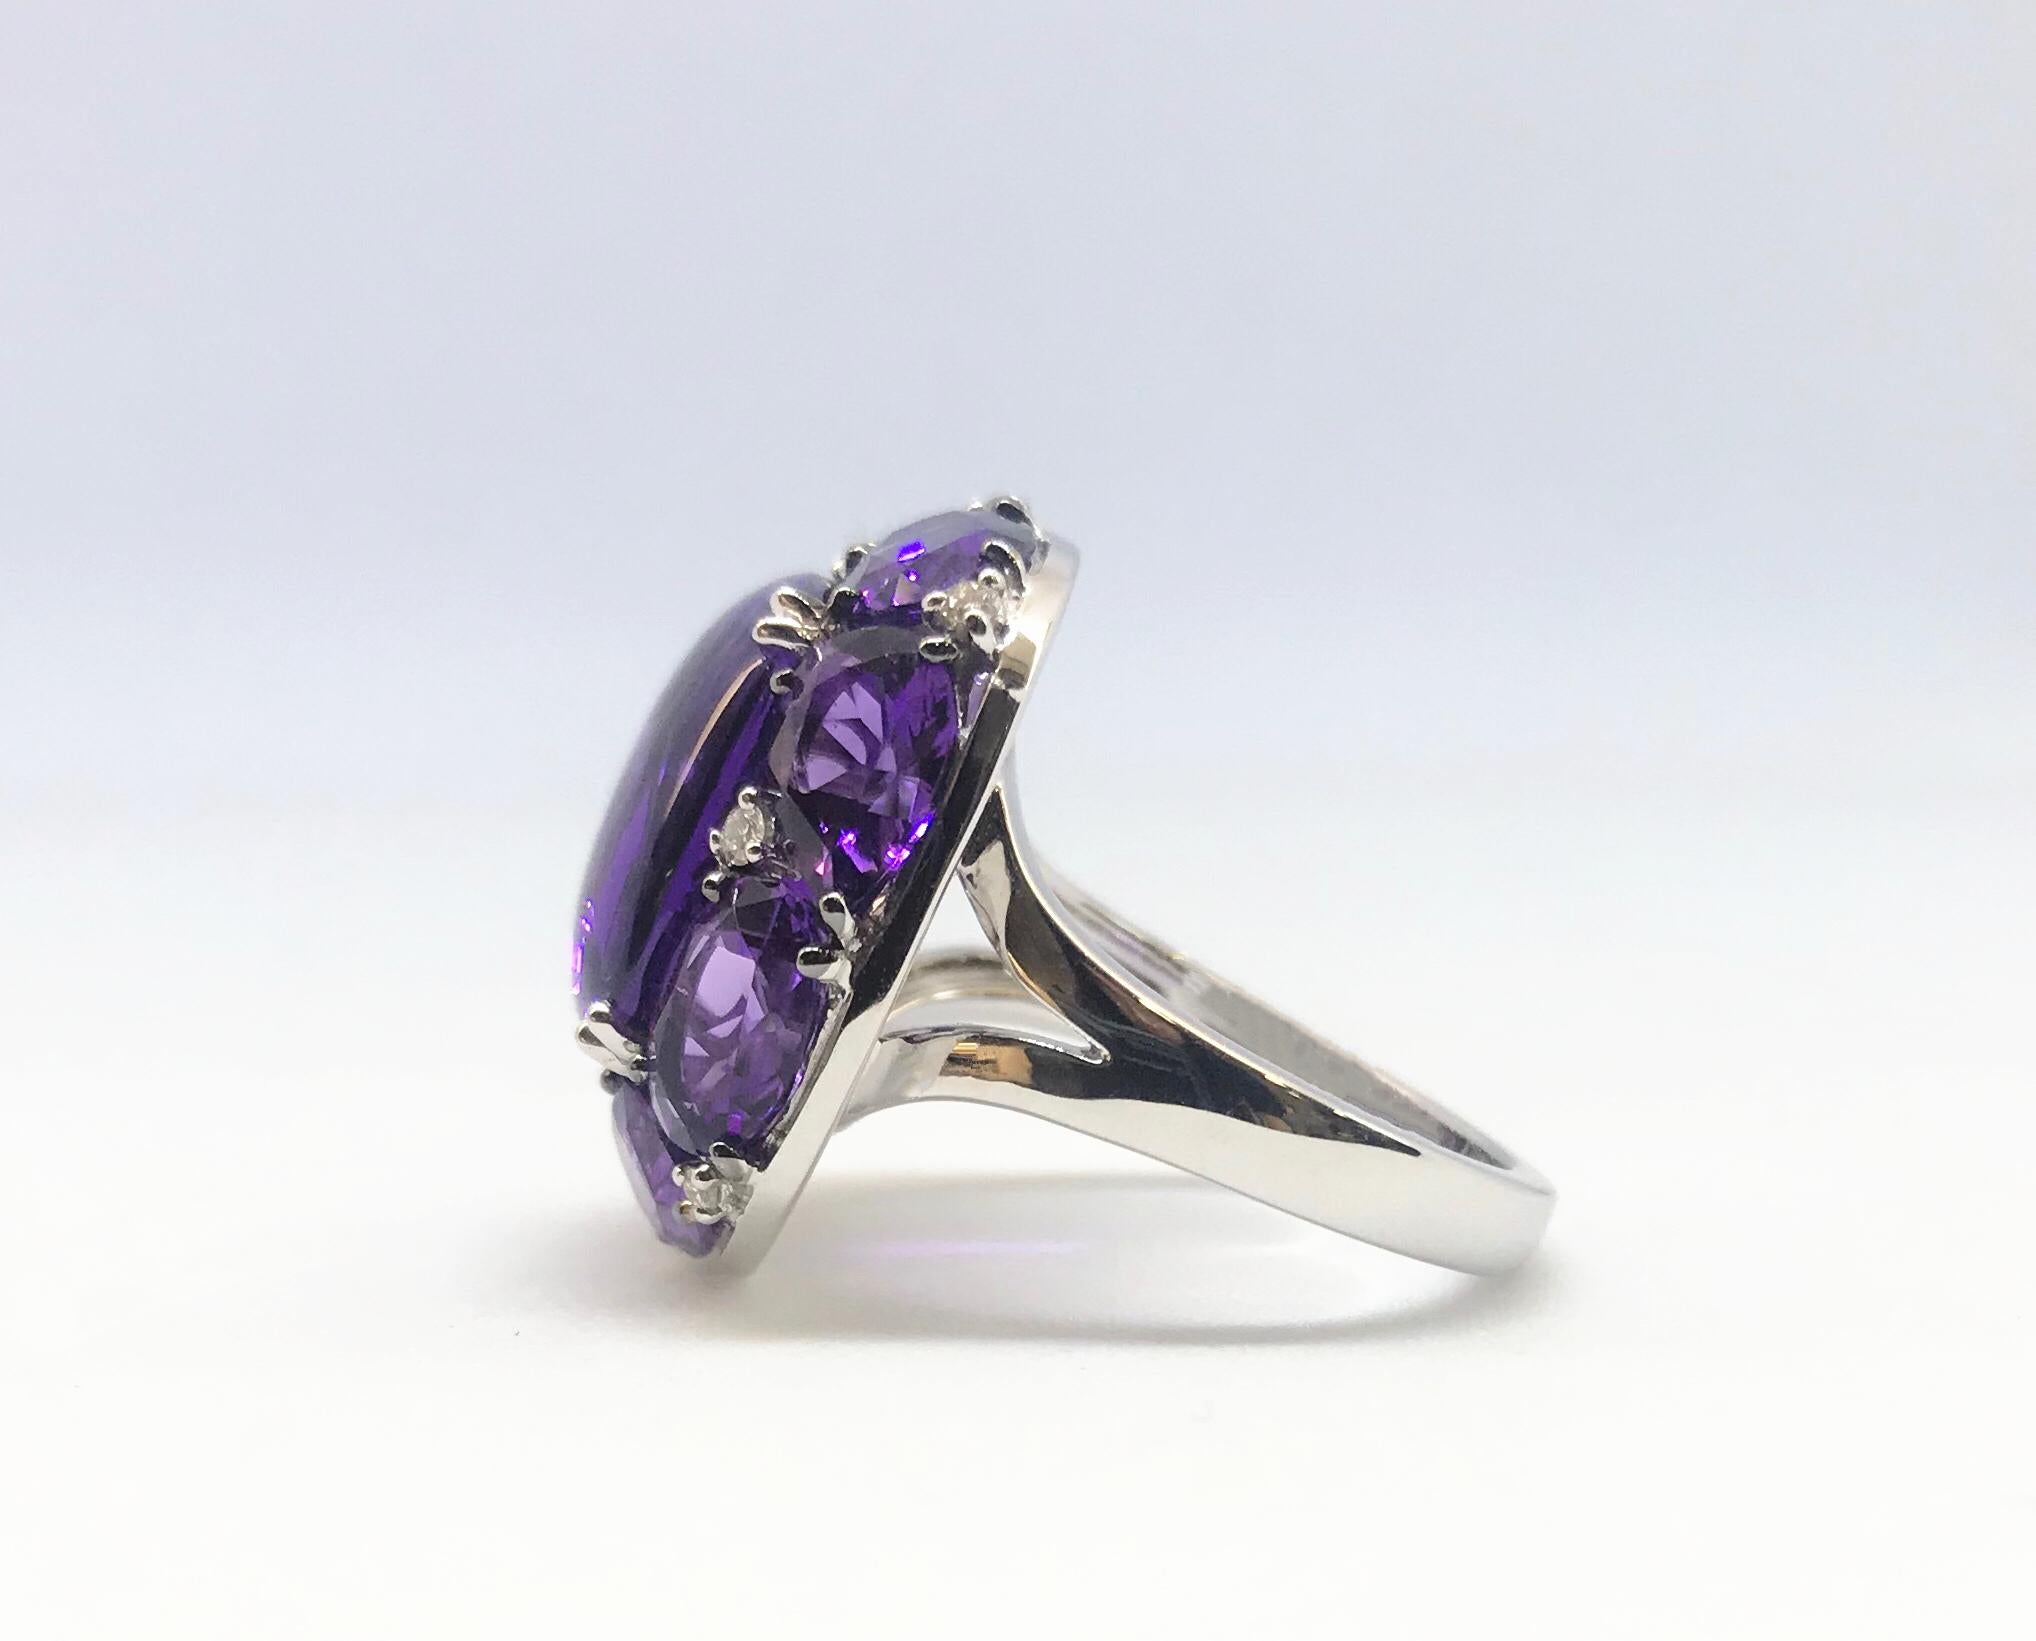 One 18 Karat white gold faceted and cabochon-cut multi-gem amethyst and diamond ring. The cushion-shaped ring centers one cushion-shaped cabochon-cut amethyst, held by 4-double prongs, and surrounded by an alternating pattern of 4-pear-shaped and 4-